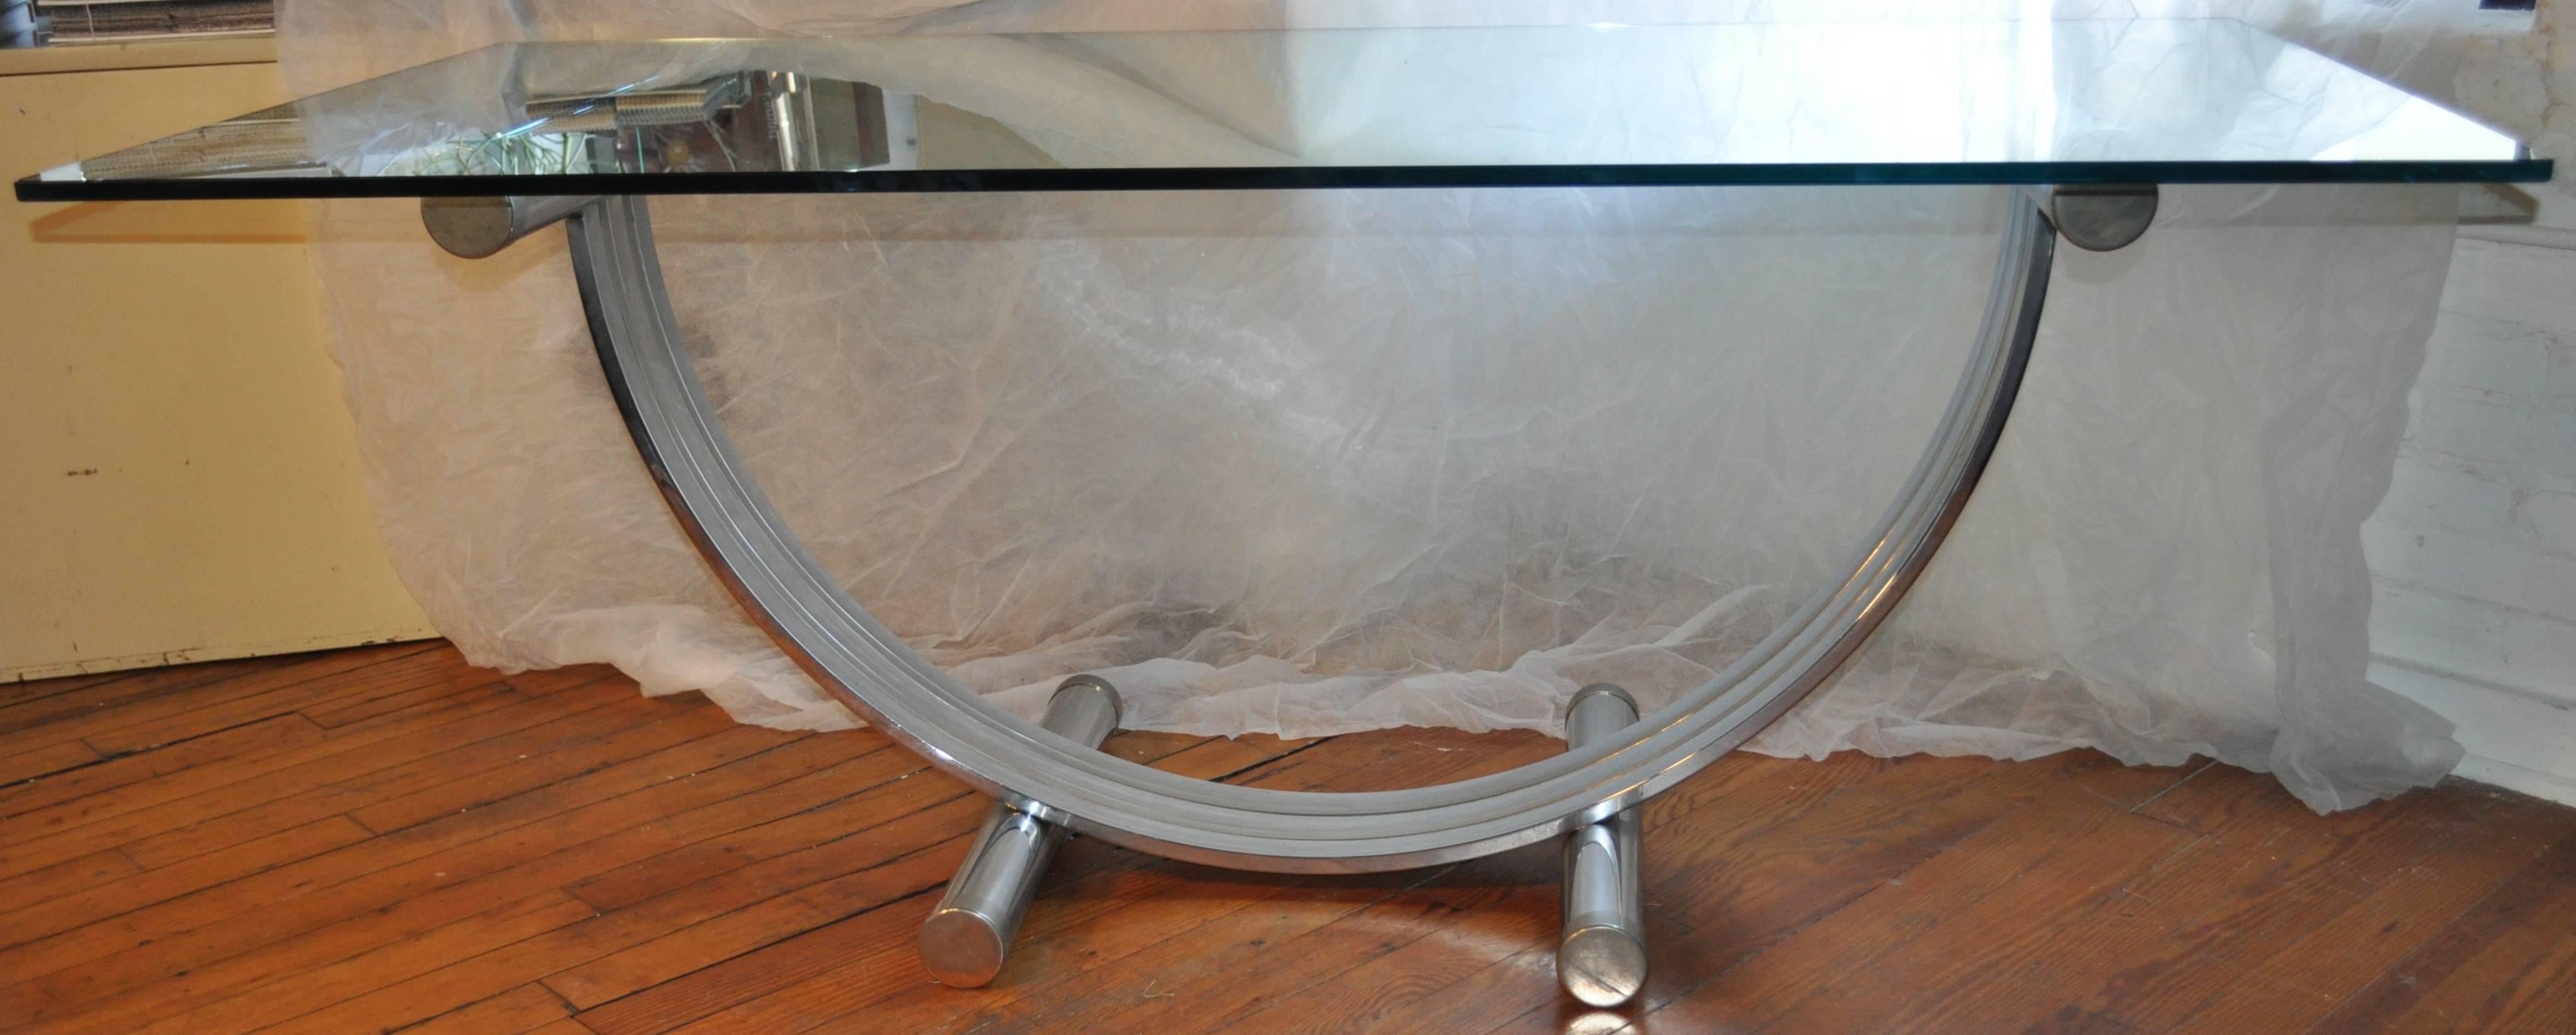 mid century modern glass dining table